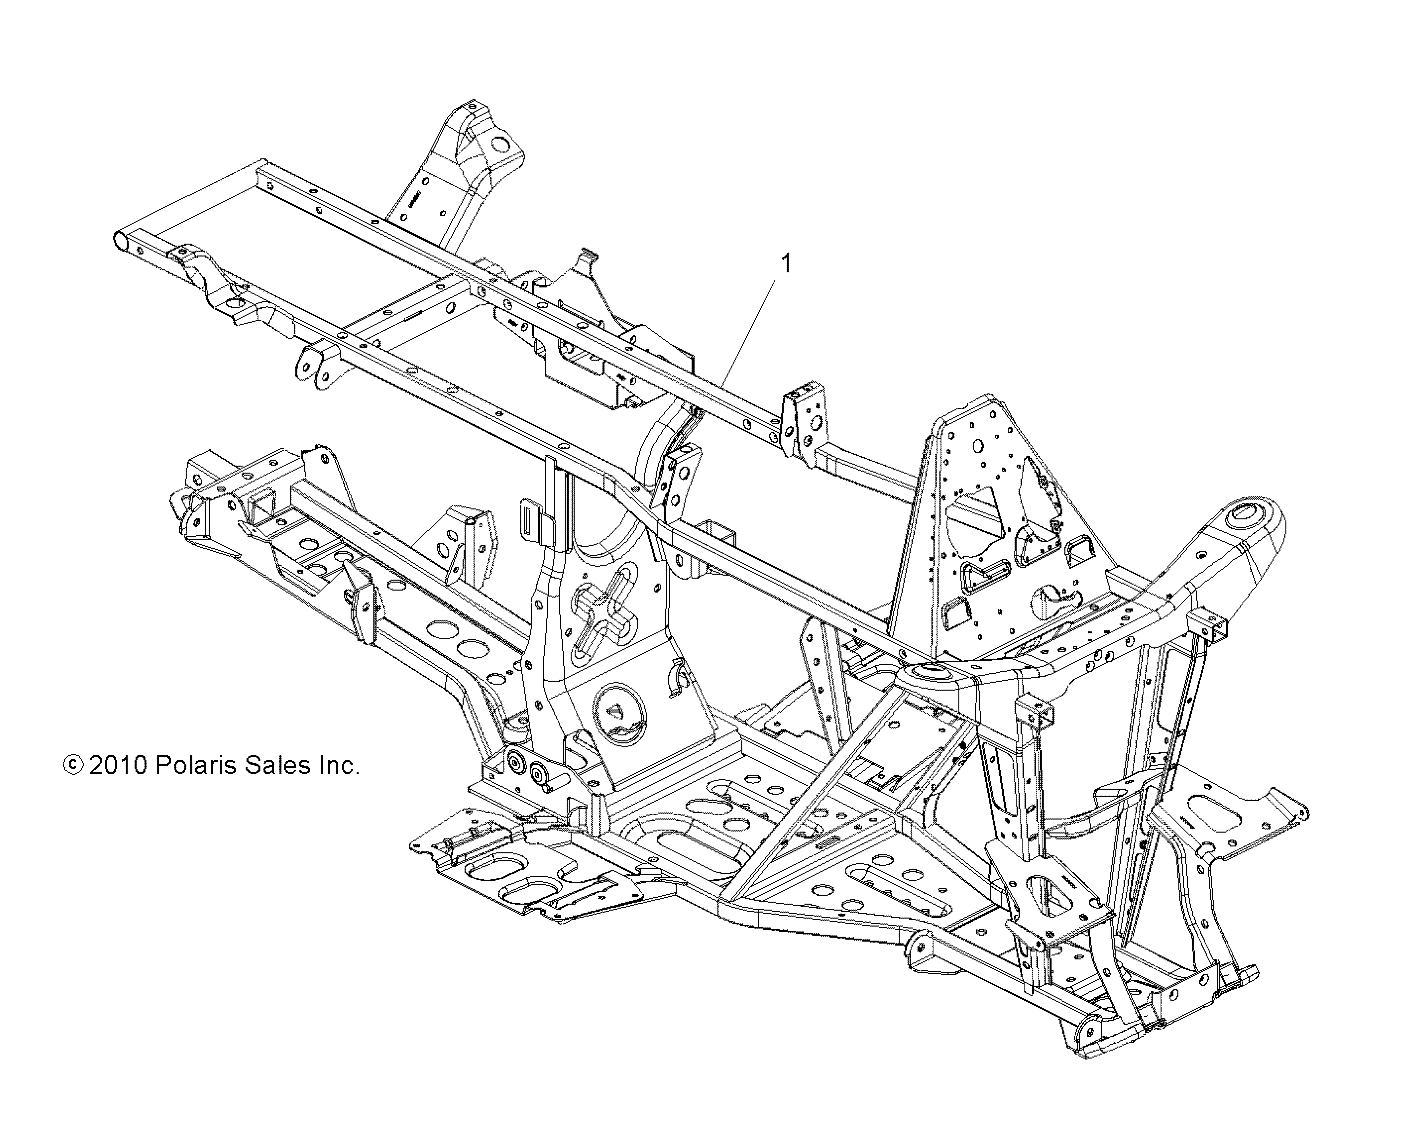 CHASSIS, FRAME - A11MH50FF (49ATVFRAME11SP500)